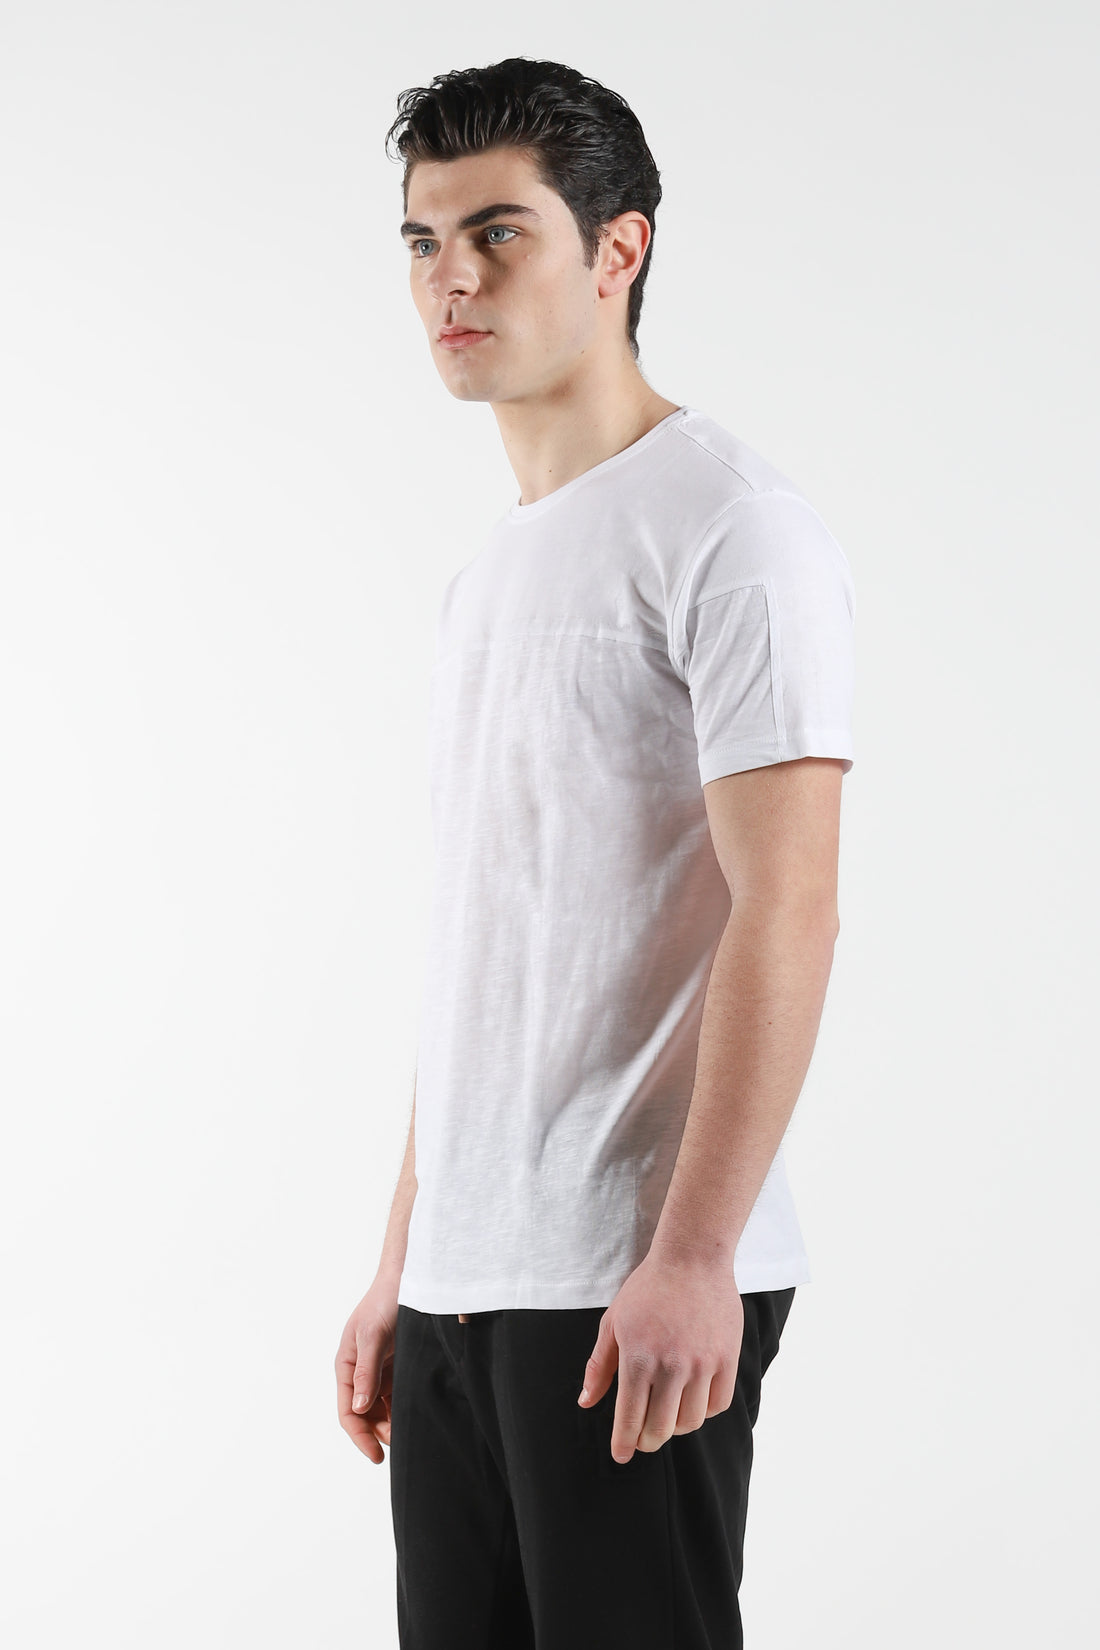 Round neck T-Shirt with color on color print - White